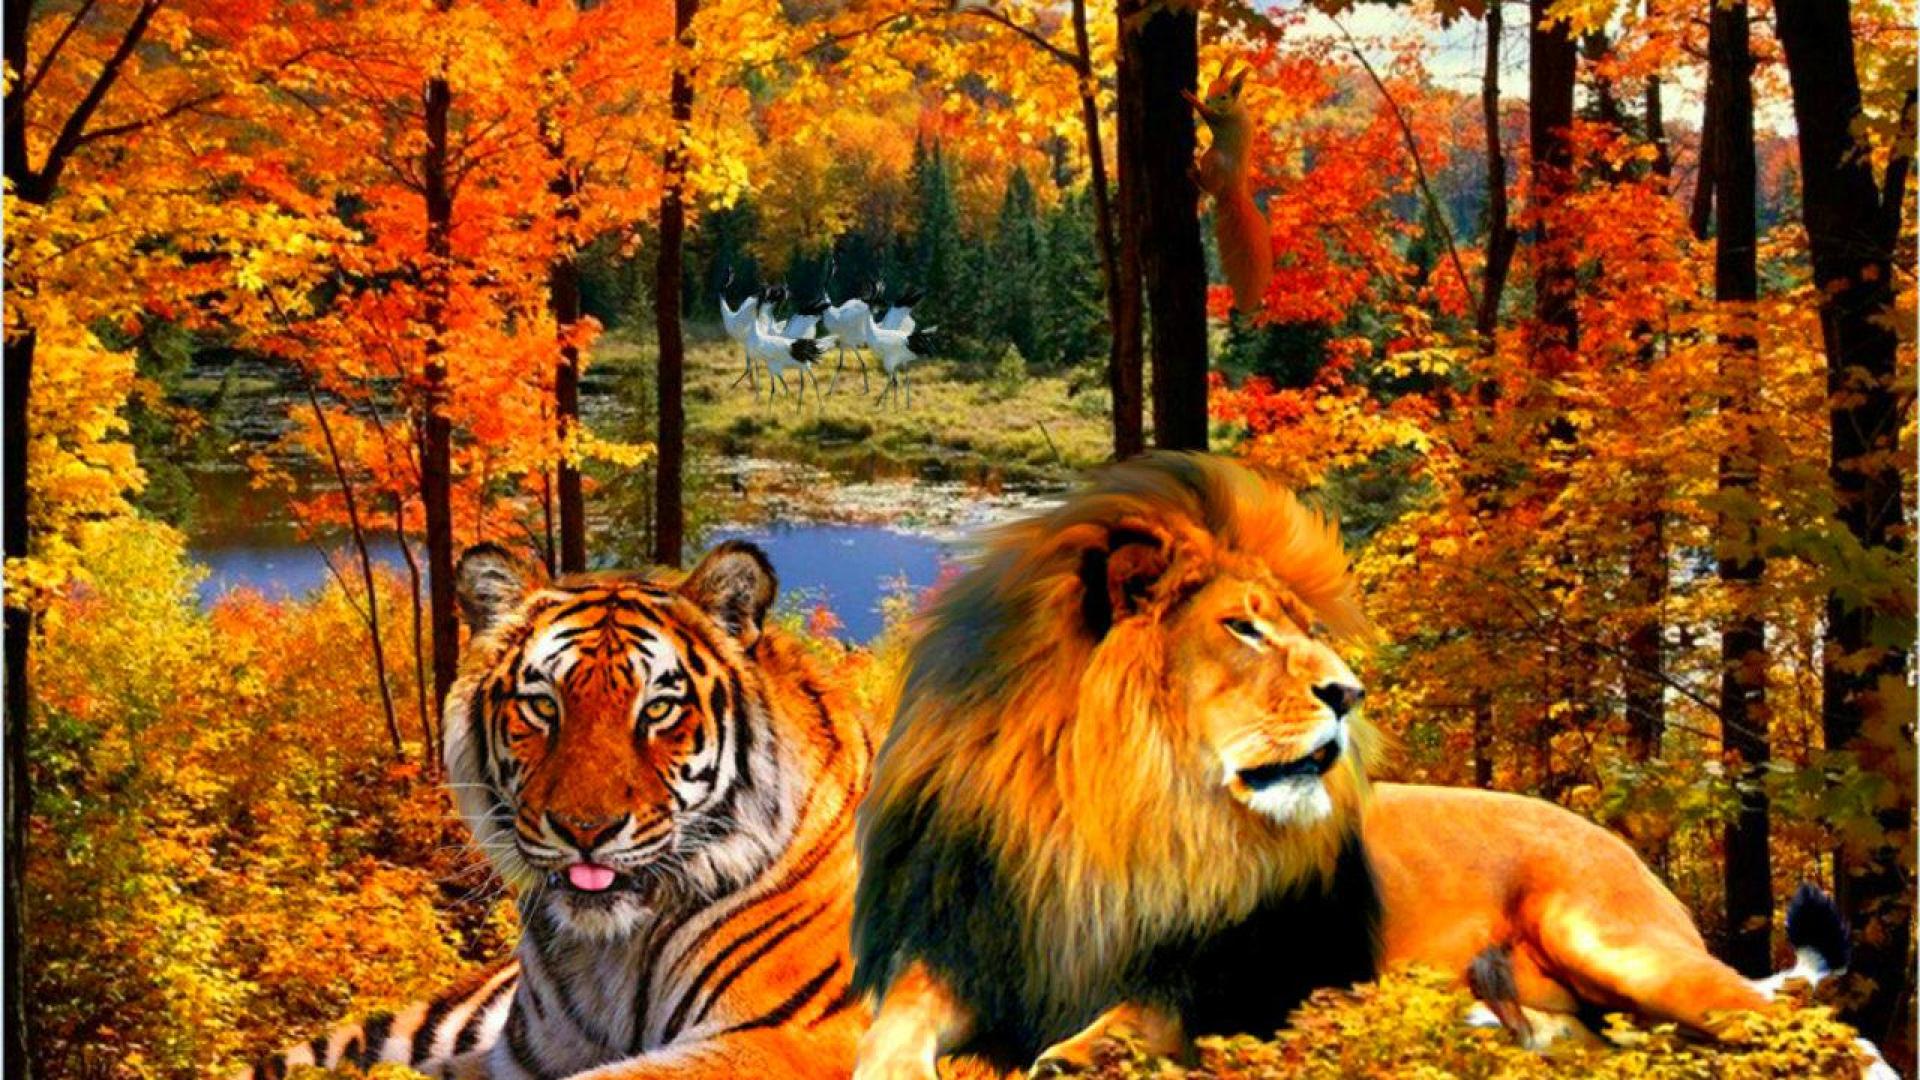 Lion and tiger - (#132408) - High Quality and Resolution ...